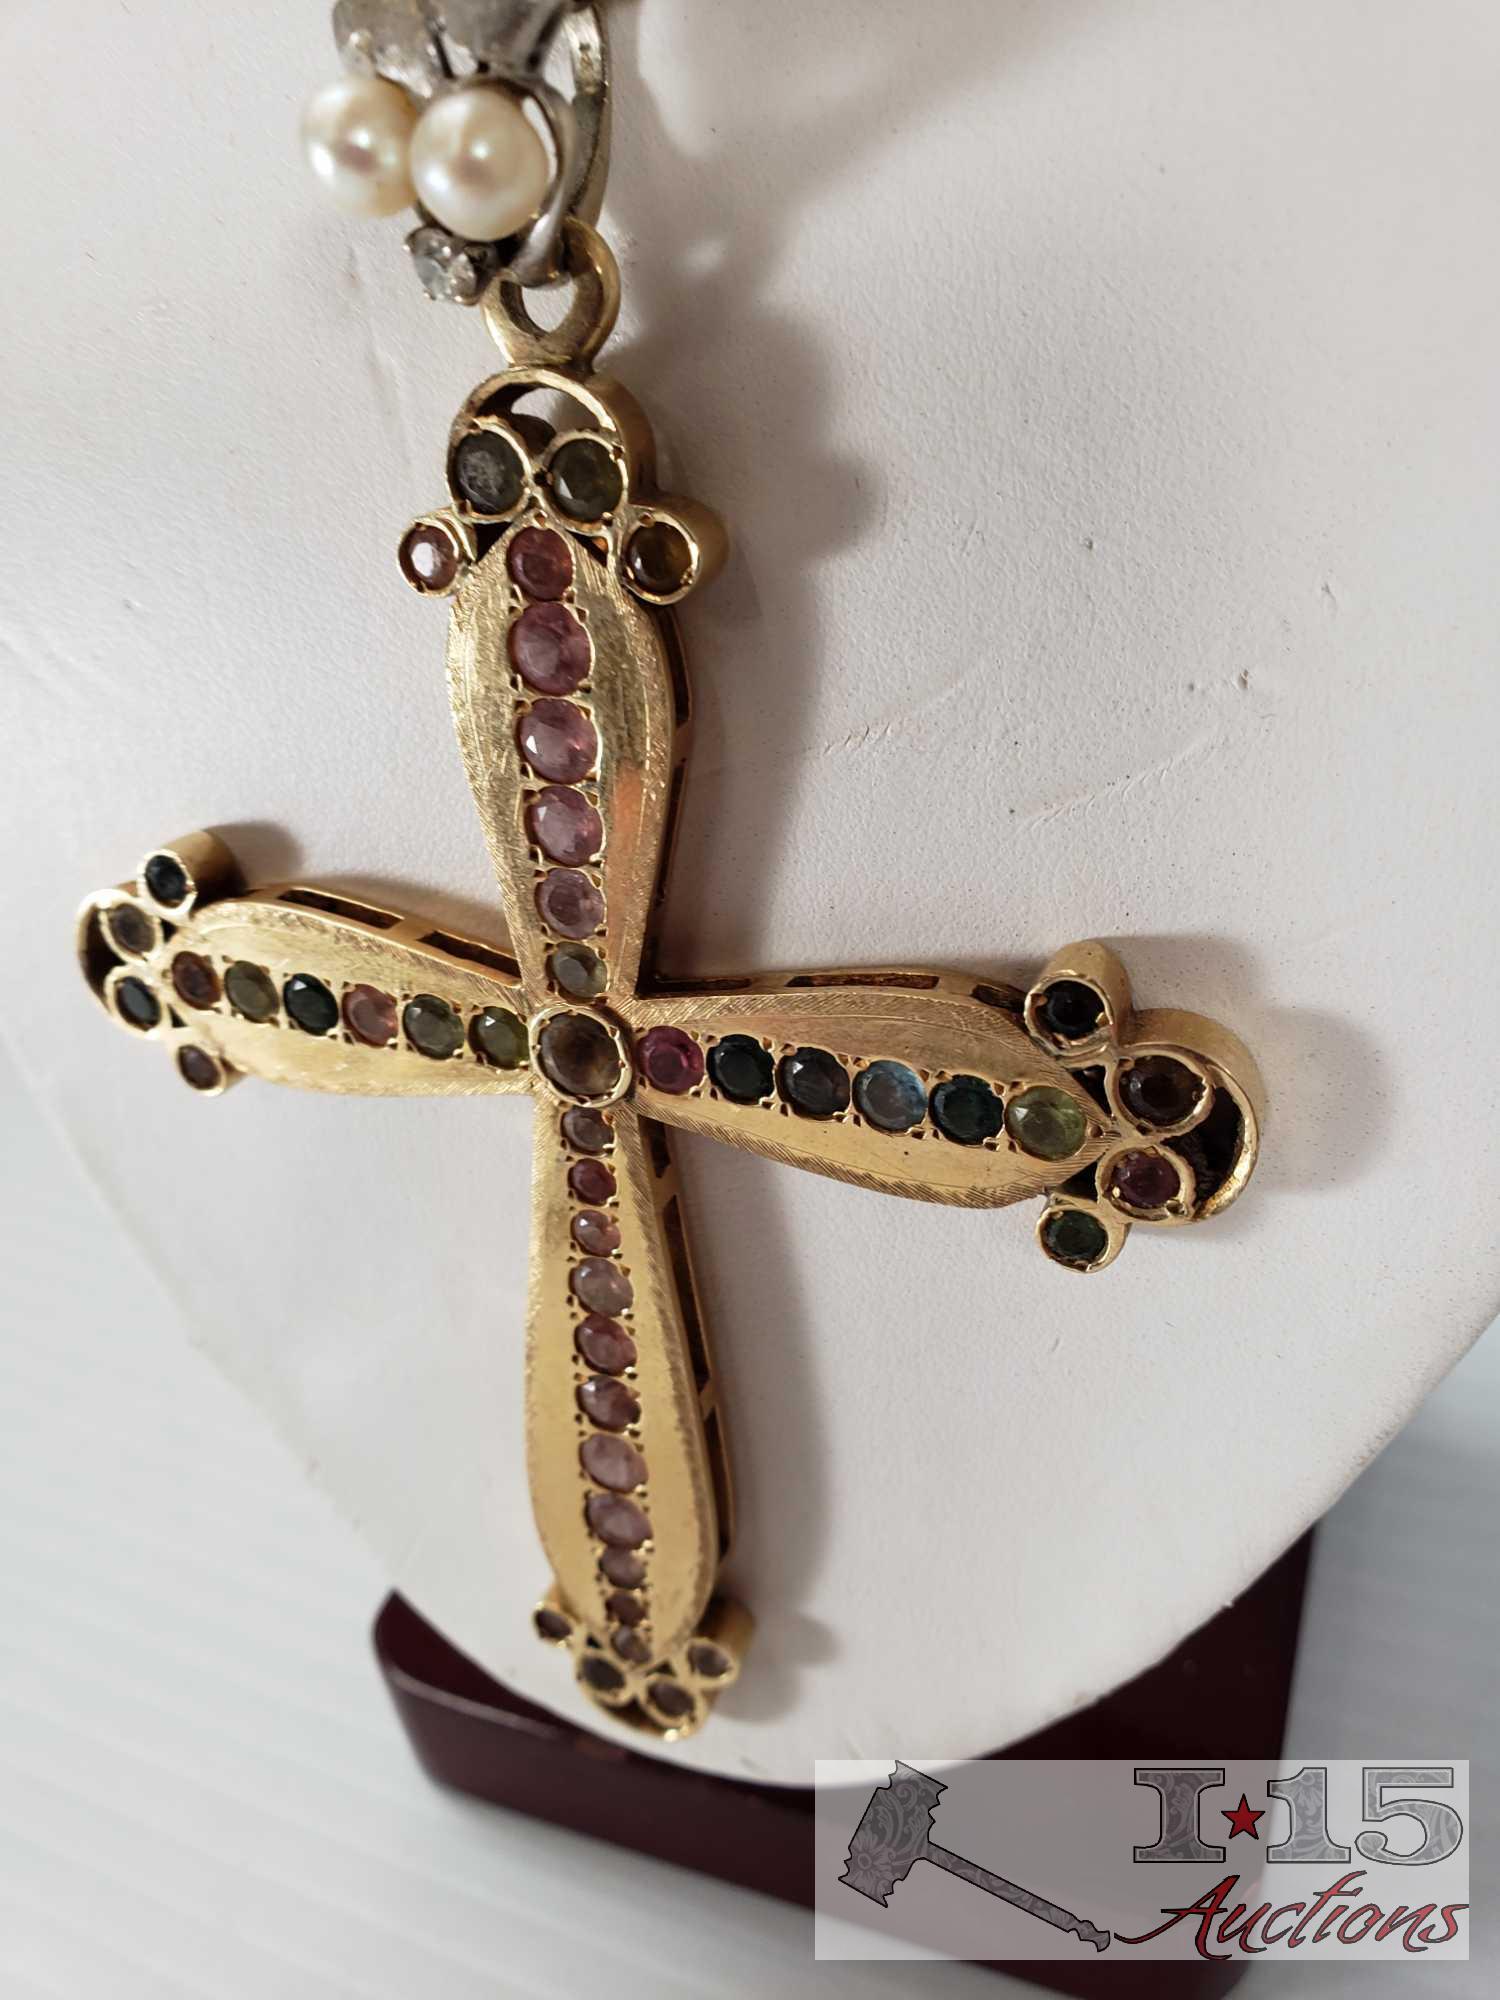 Necklace with 14k Gold Cross Pendant